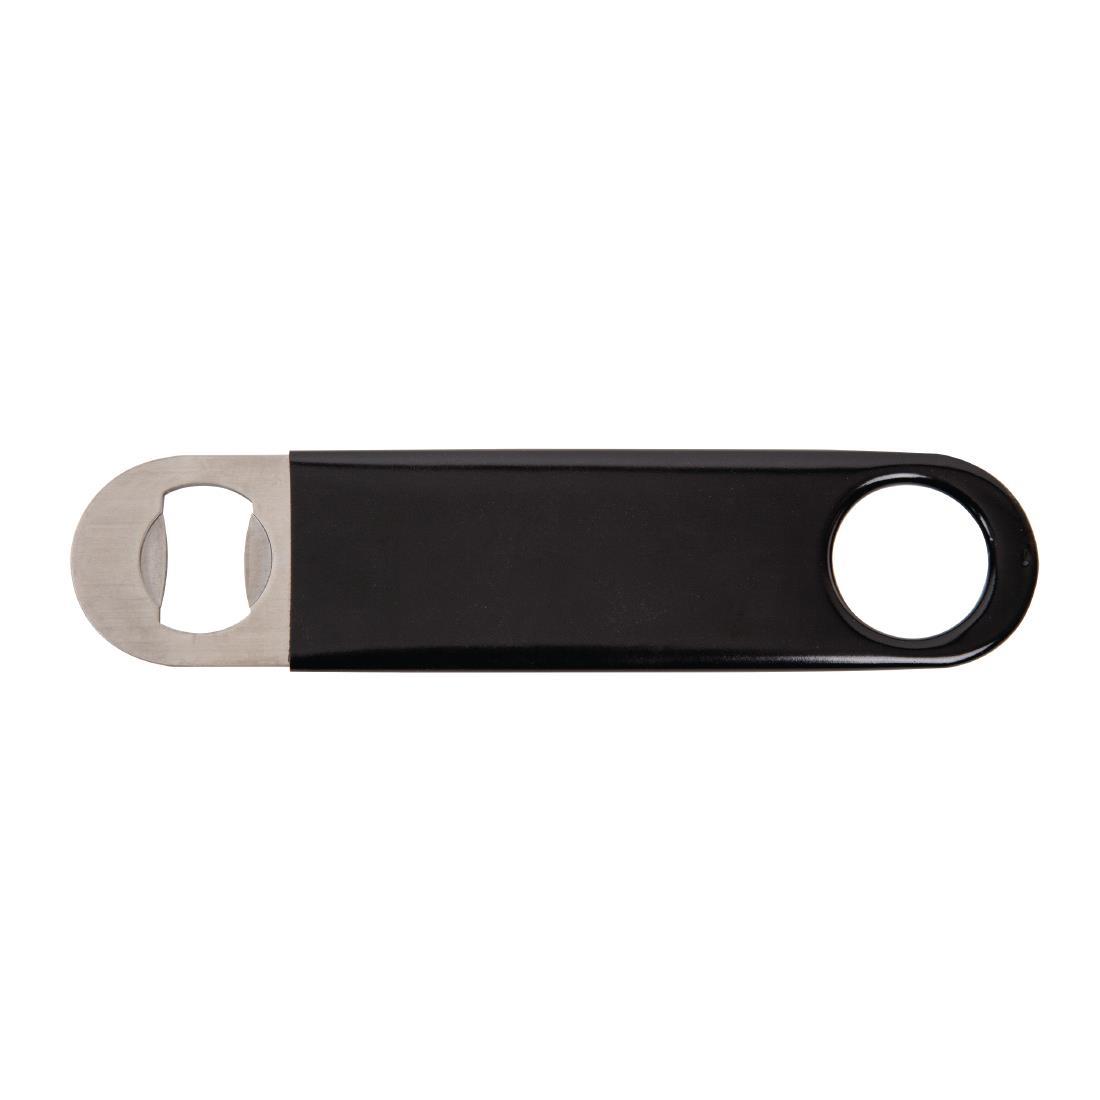 Olympia Bar Blade Bottle Opener with PVC Grip - CD273  - 2